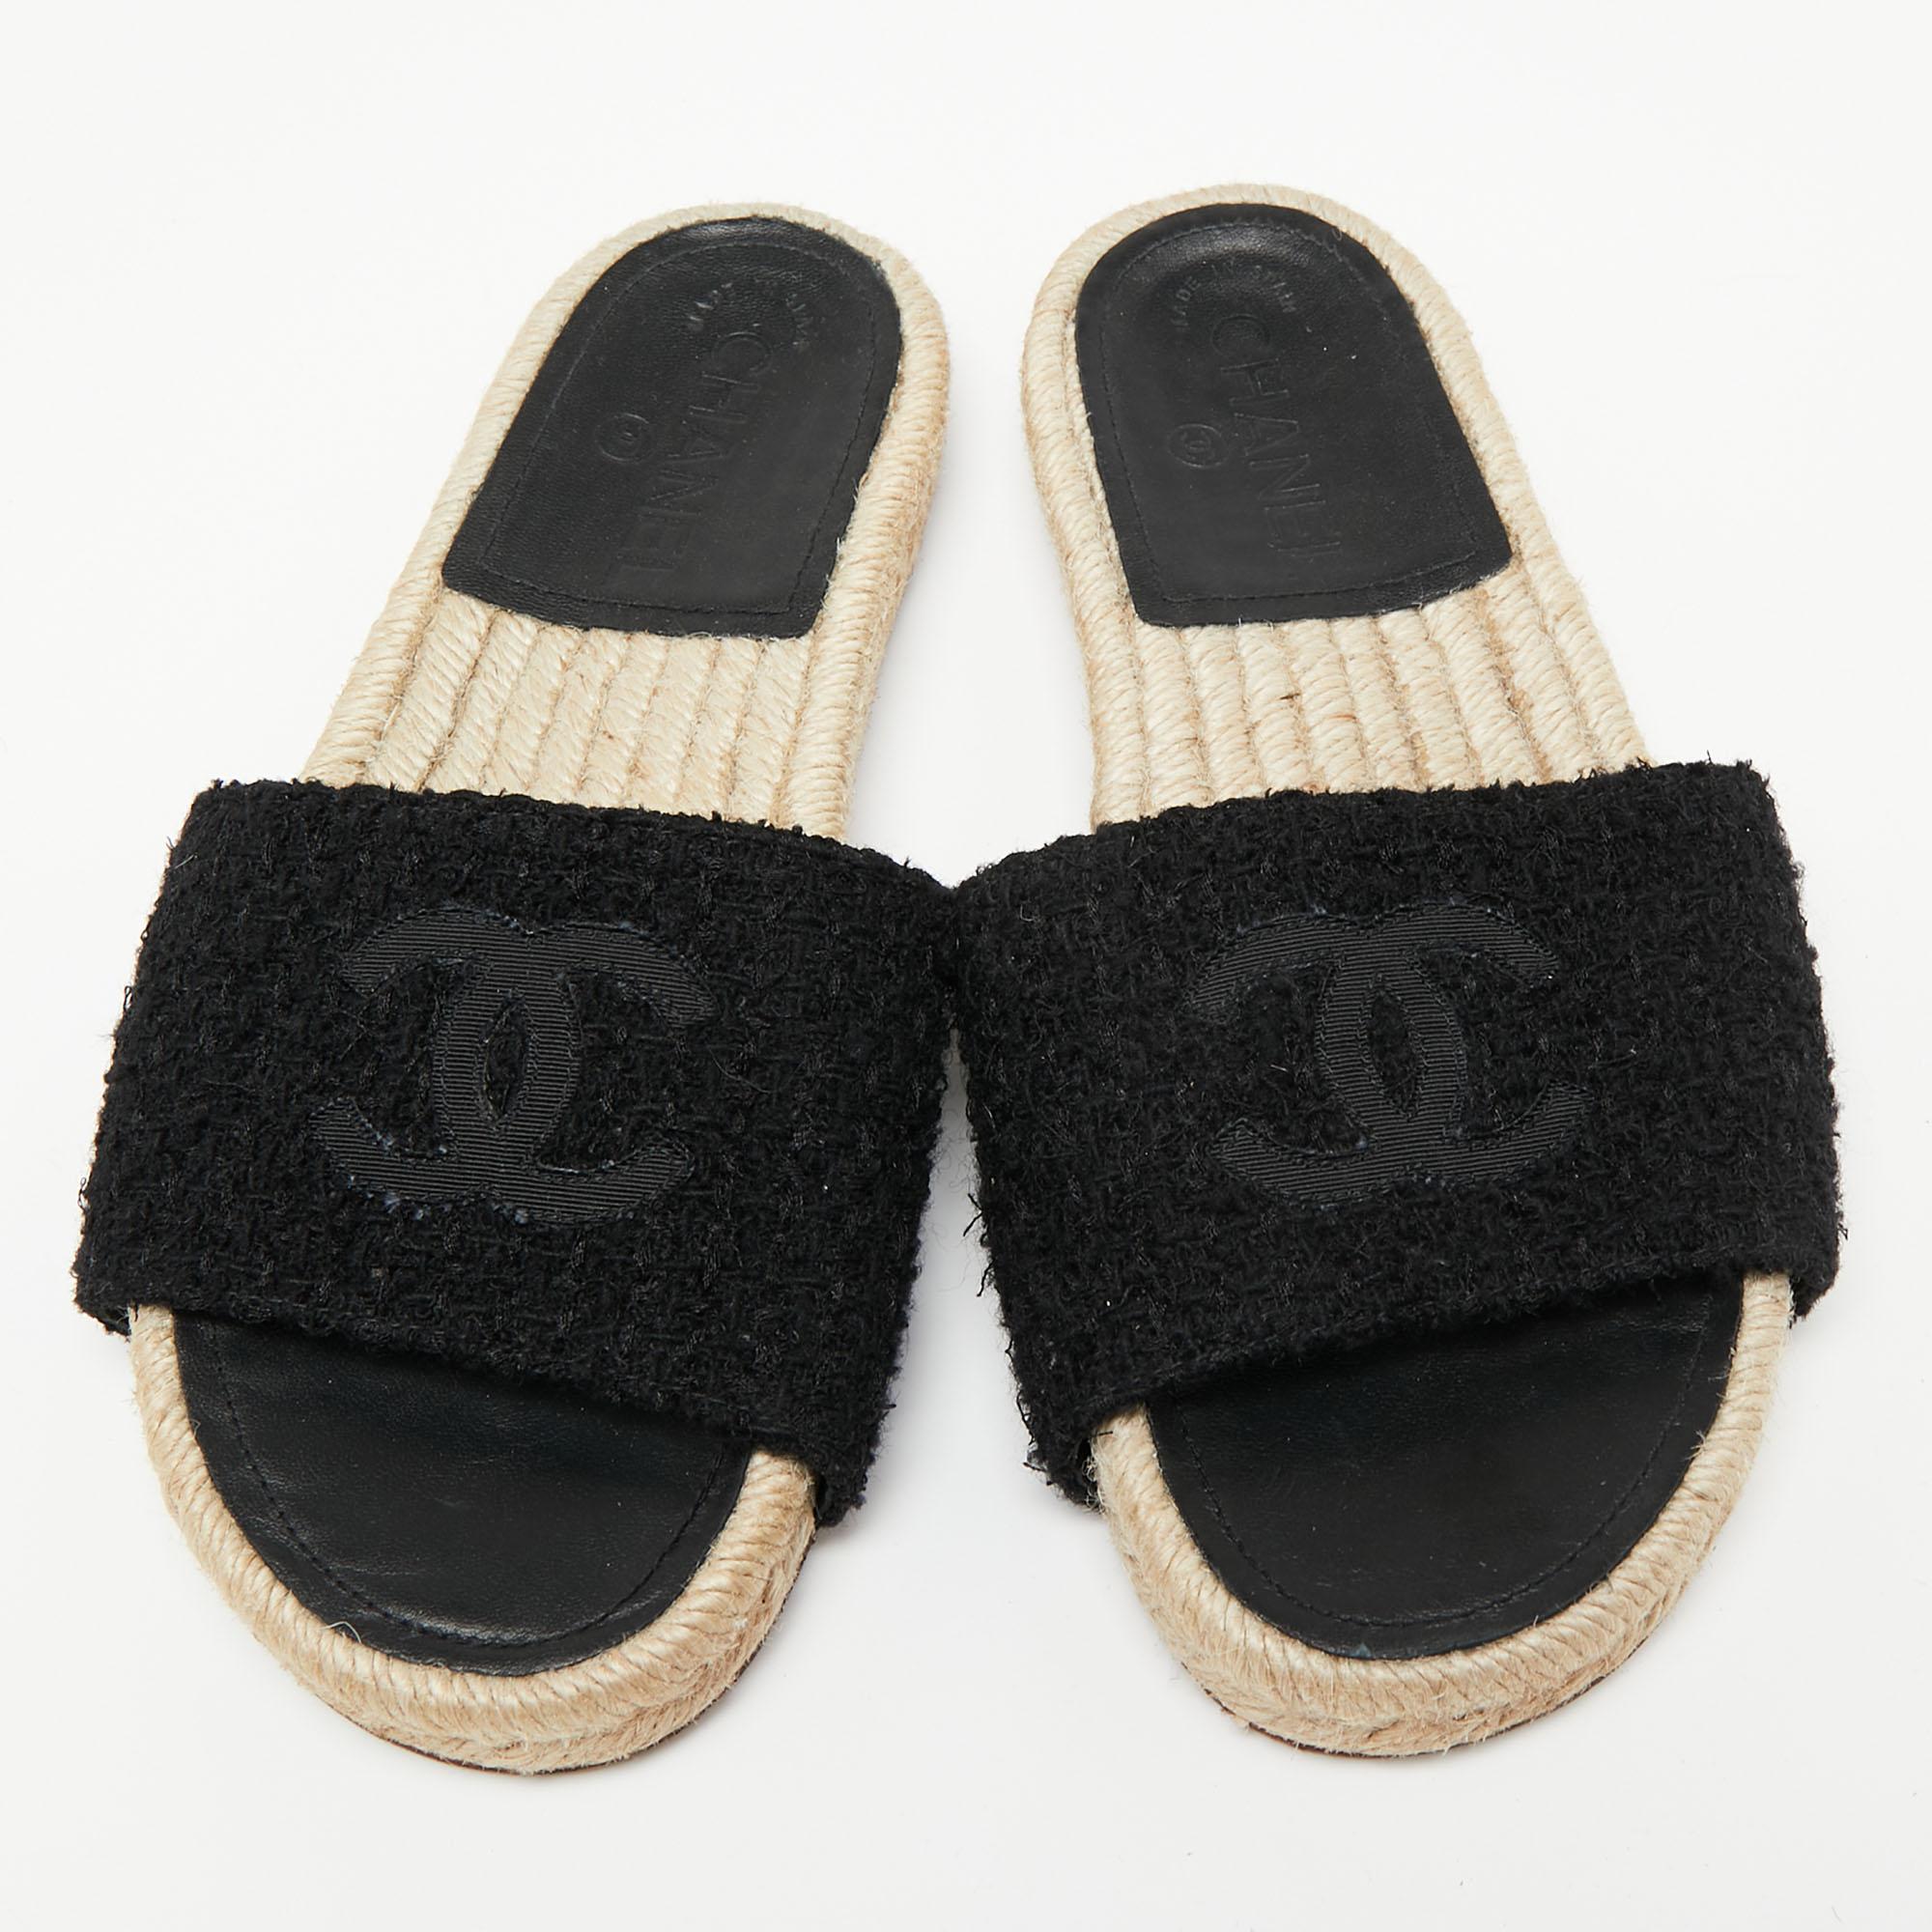 The house of Chanel brings to you these impressive flats that complement any outfit. These slides feature espadrille soles and the CC logo on the uppers. This impressive pair of flats will make a wonderful style statement.

